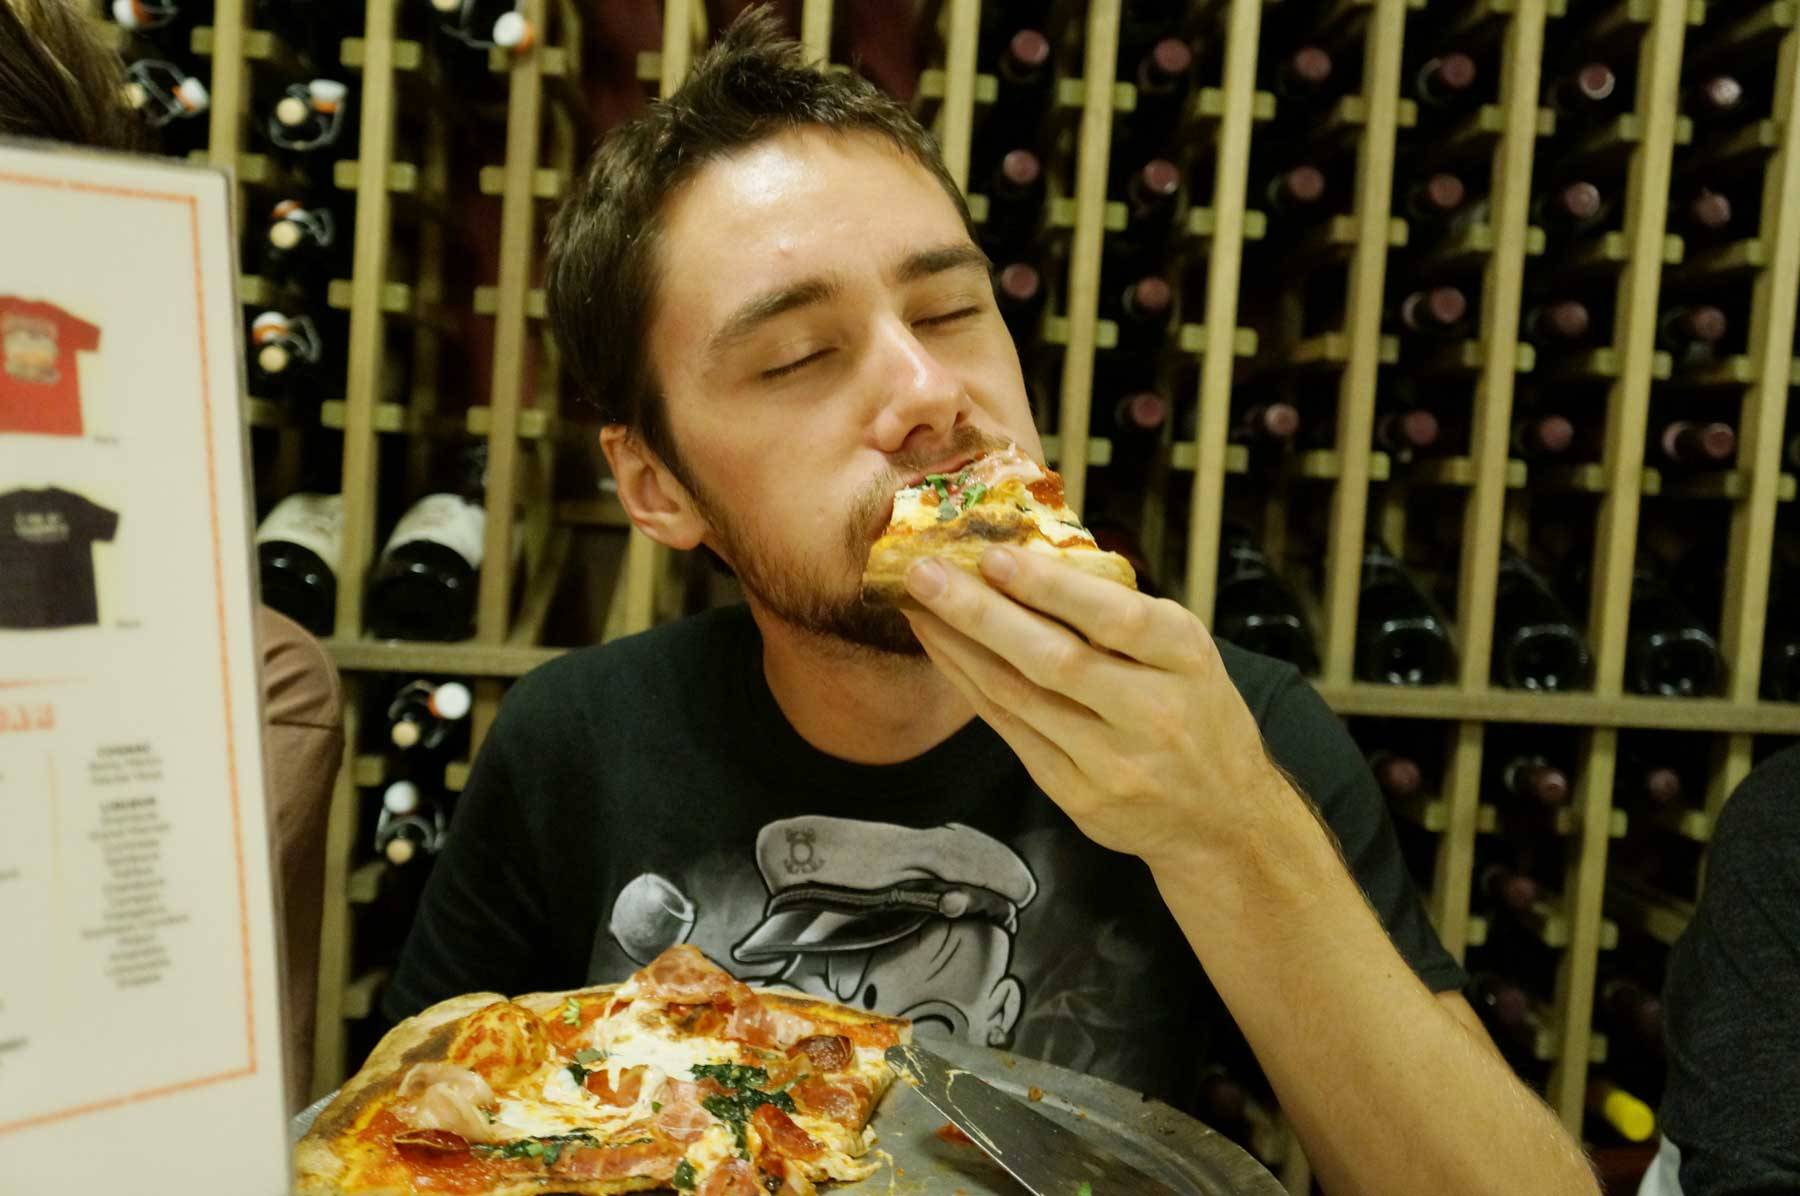 Jared with his pizza